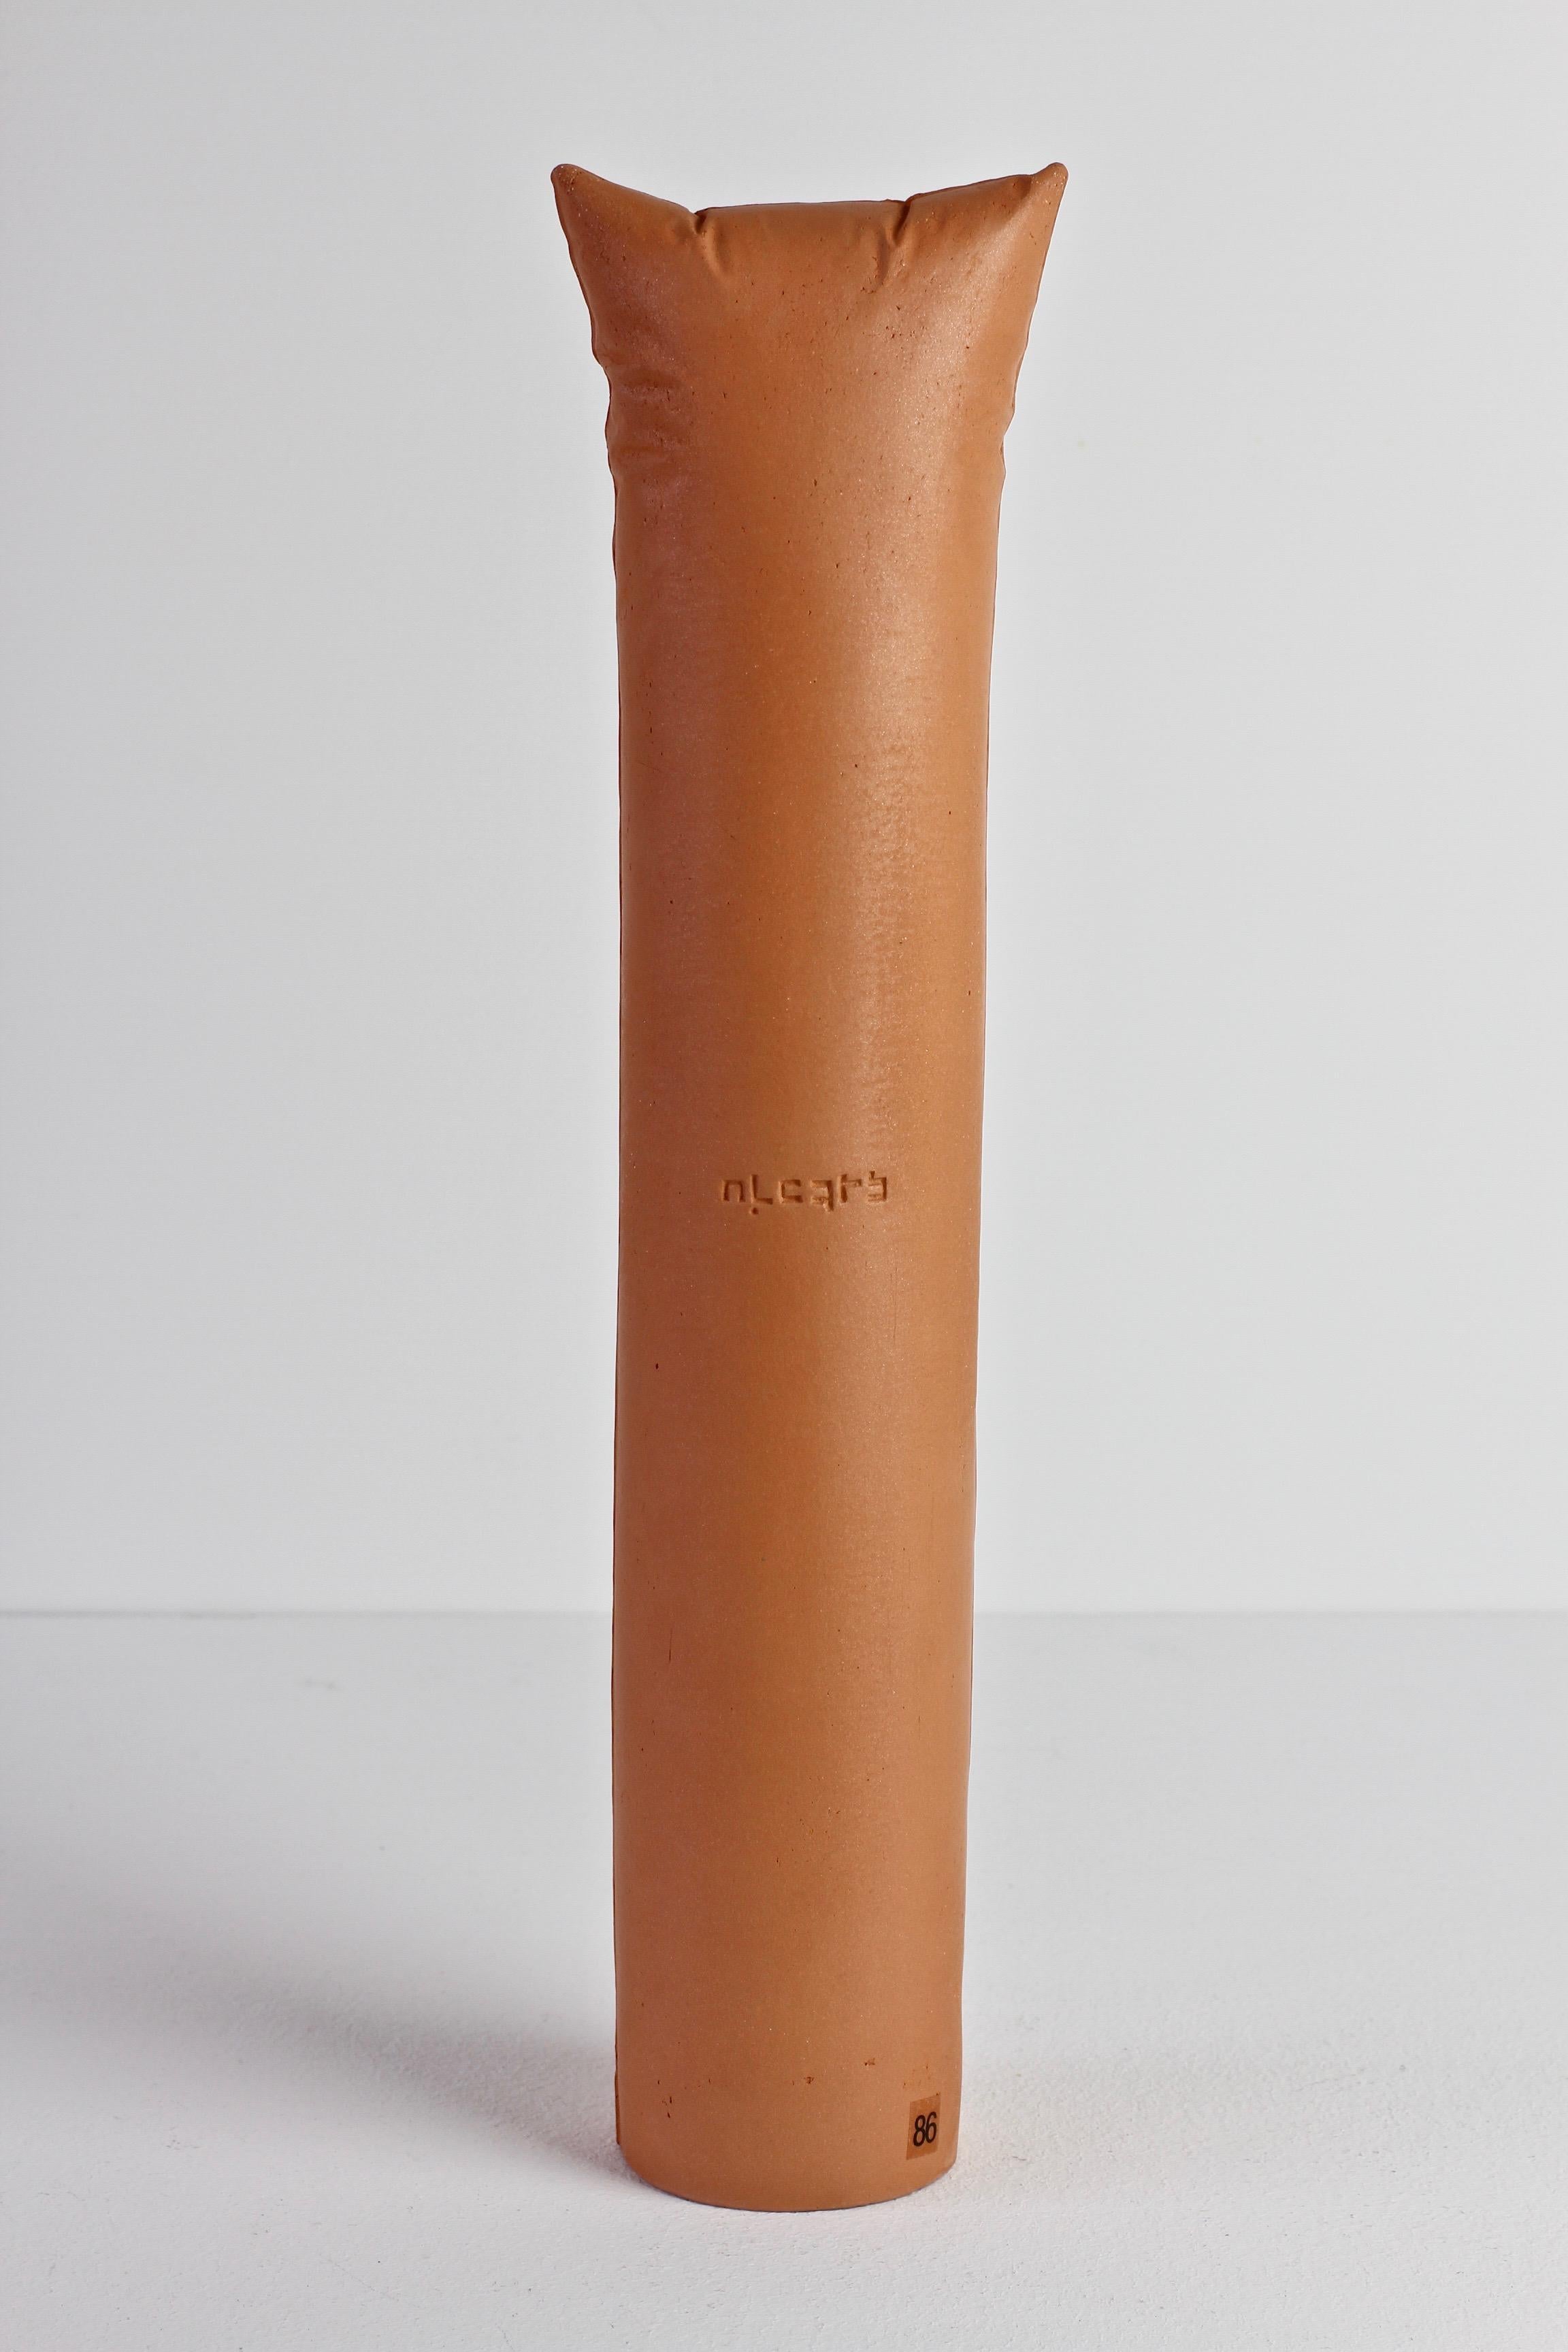 Gabriele Pütz vintage abstract realism ceramic artwork made in Germany, 1982. This work is made of a round clay tower / pillar with pillow edge details. On the body of the tower is written 'nichts' meaning 'nothing' in German. Unfortunately it